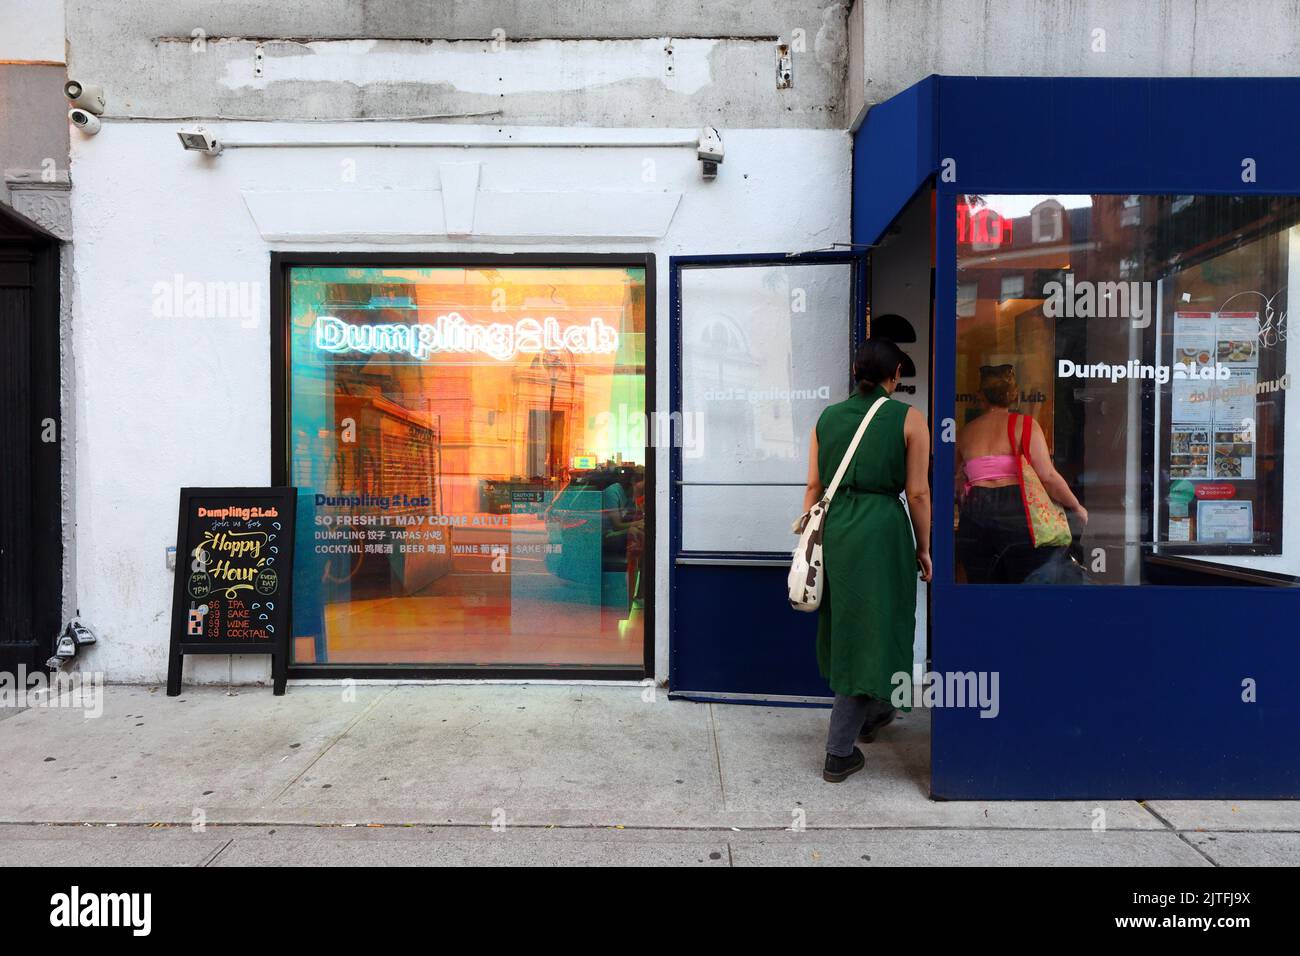 [historical storefront] Dumpling Lab, 214 E 9th St, New York. NYC storefront photo of a Tsingtao inspired Chinese seafood and dumpling restaurant Stock Photo